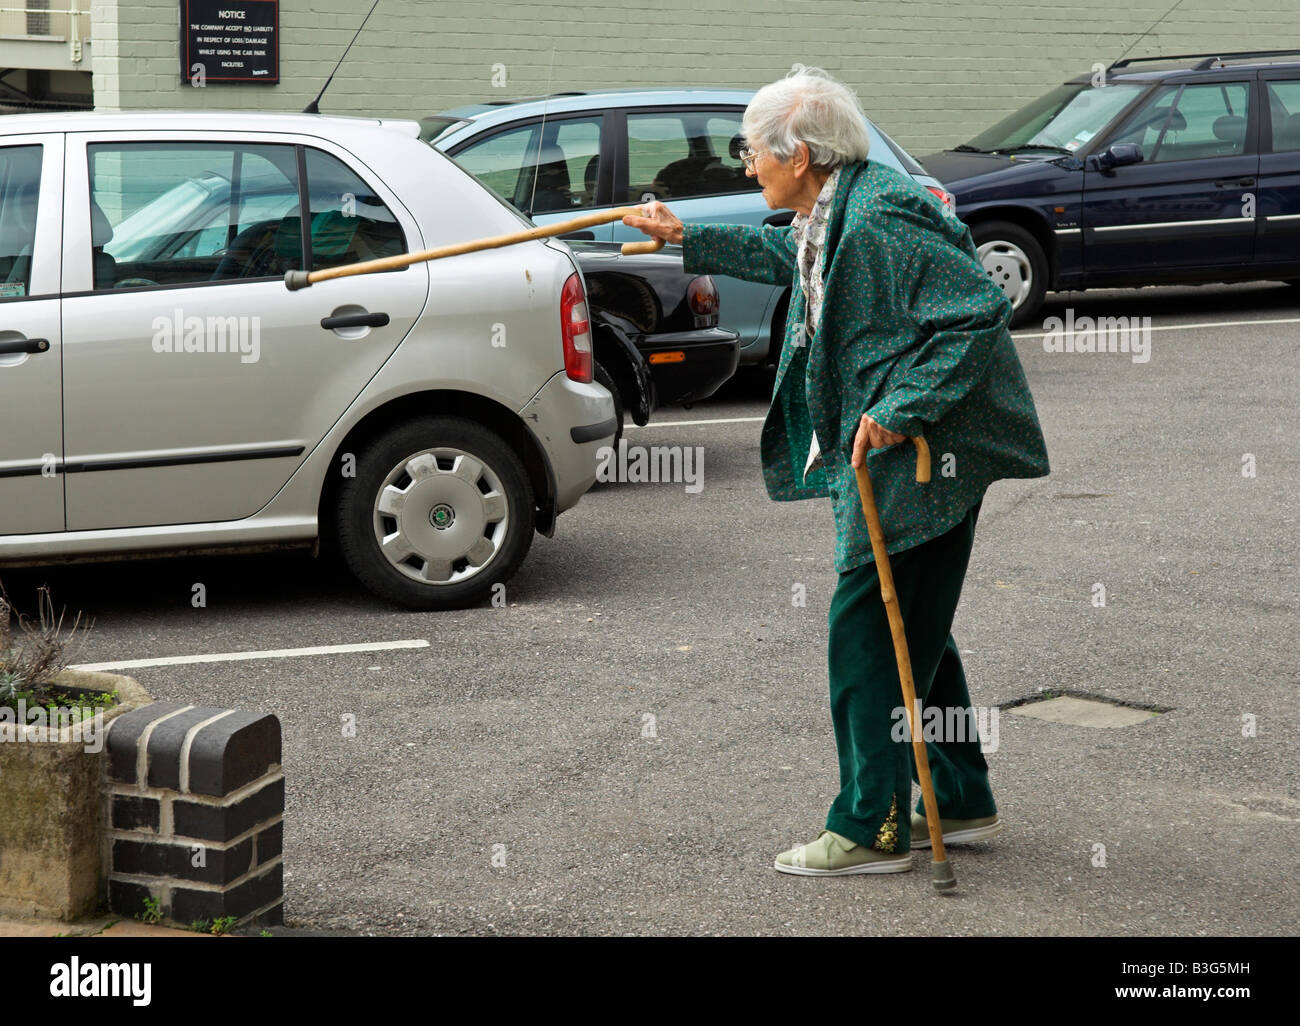 Active elderly English 92 year old woman walking in car park with canes Stock Photo